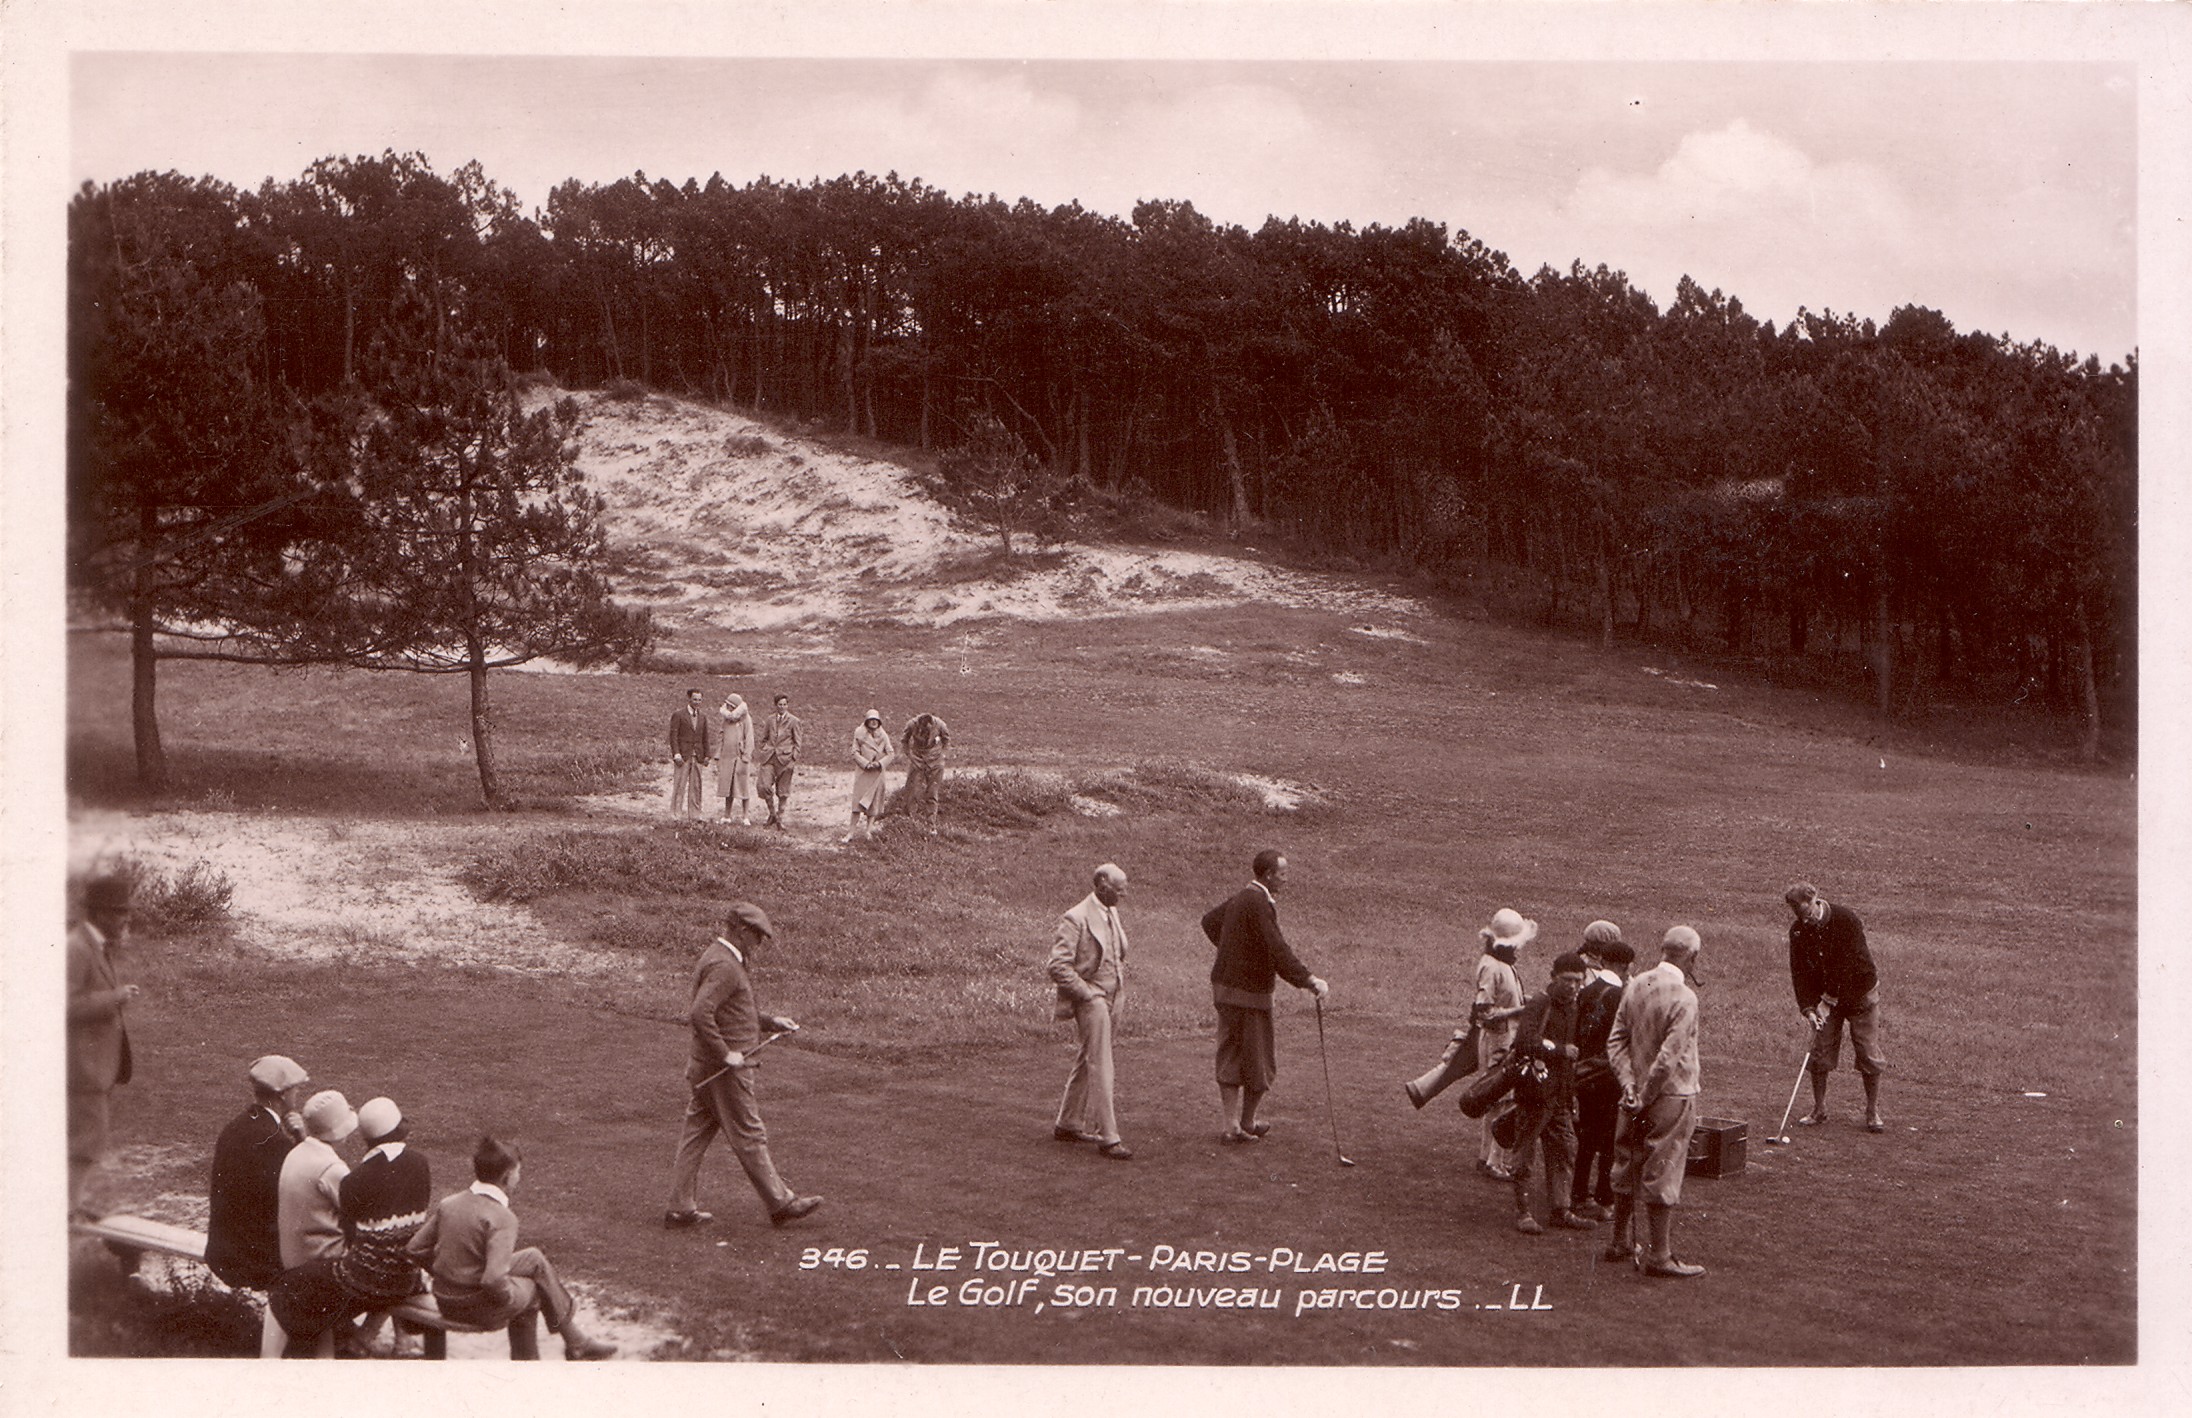 Le Touquet Golf Resort is full of history